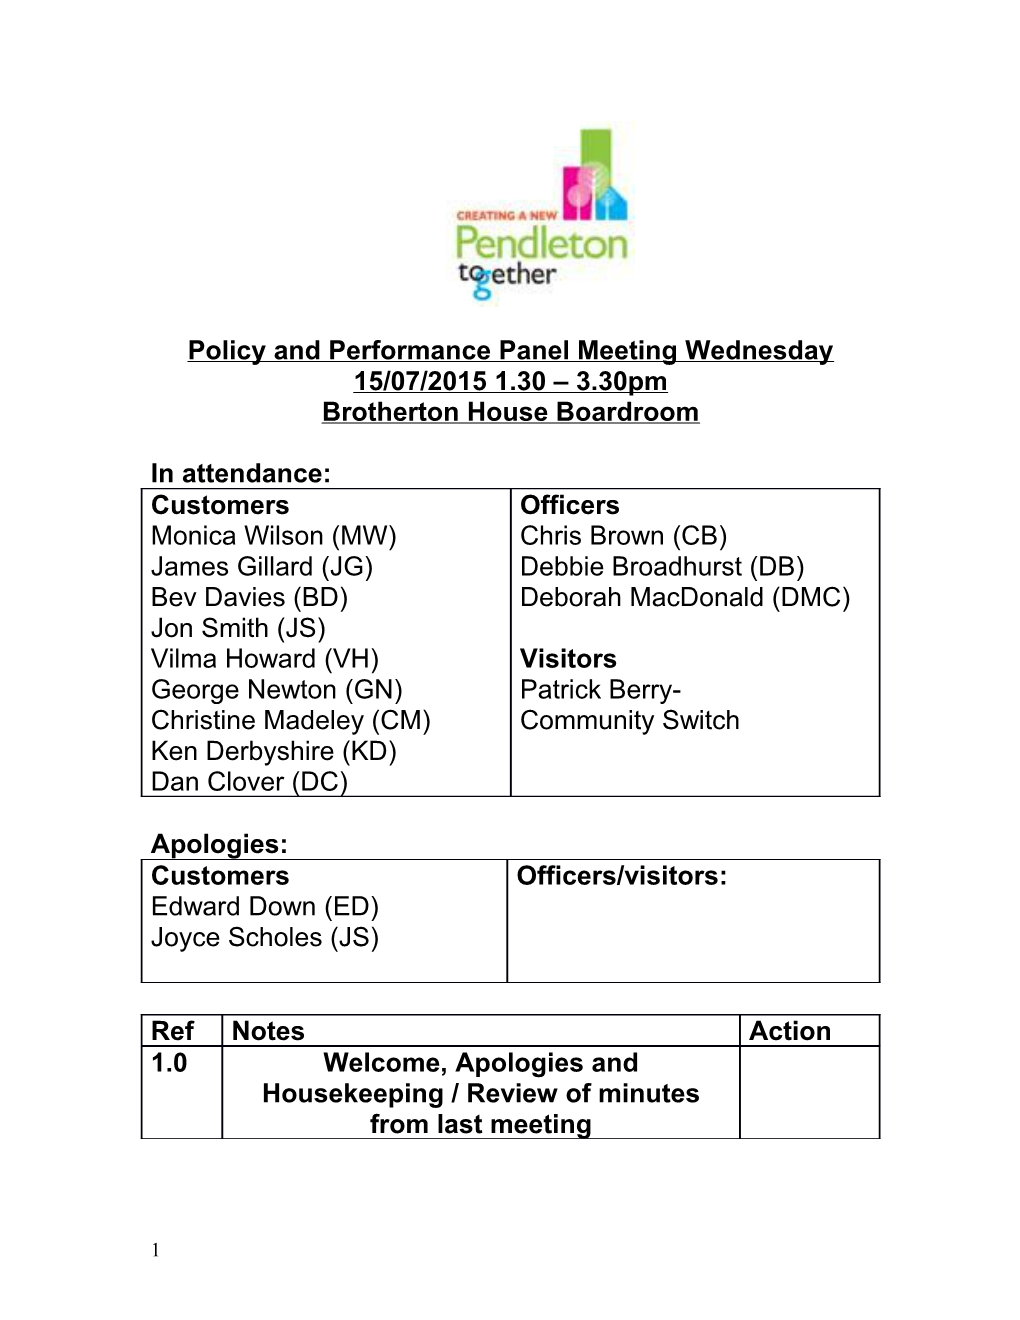 Policy and Performance Panel Meeting Wednesday 15/07/2015 1.30 3.30Pm